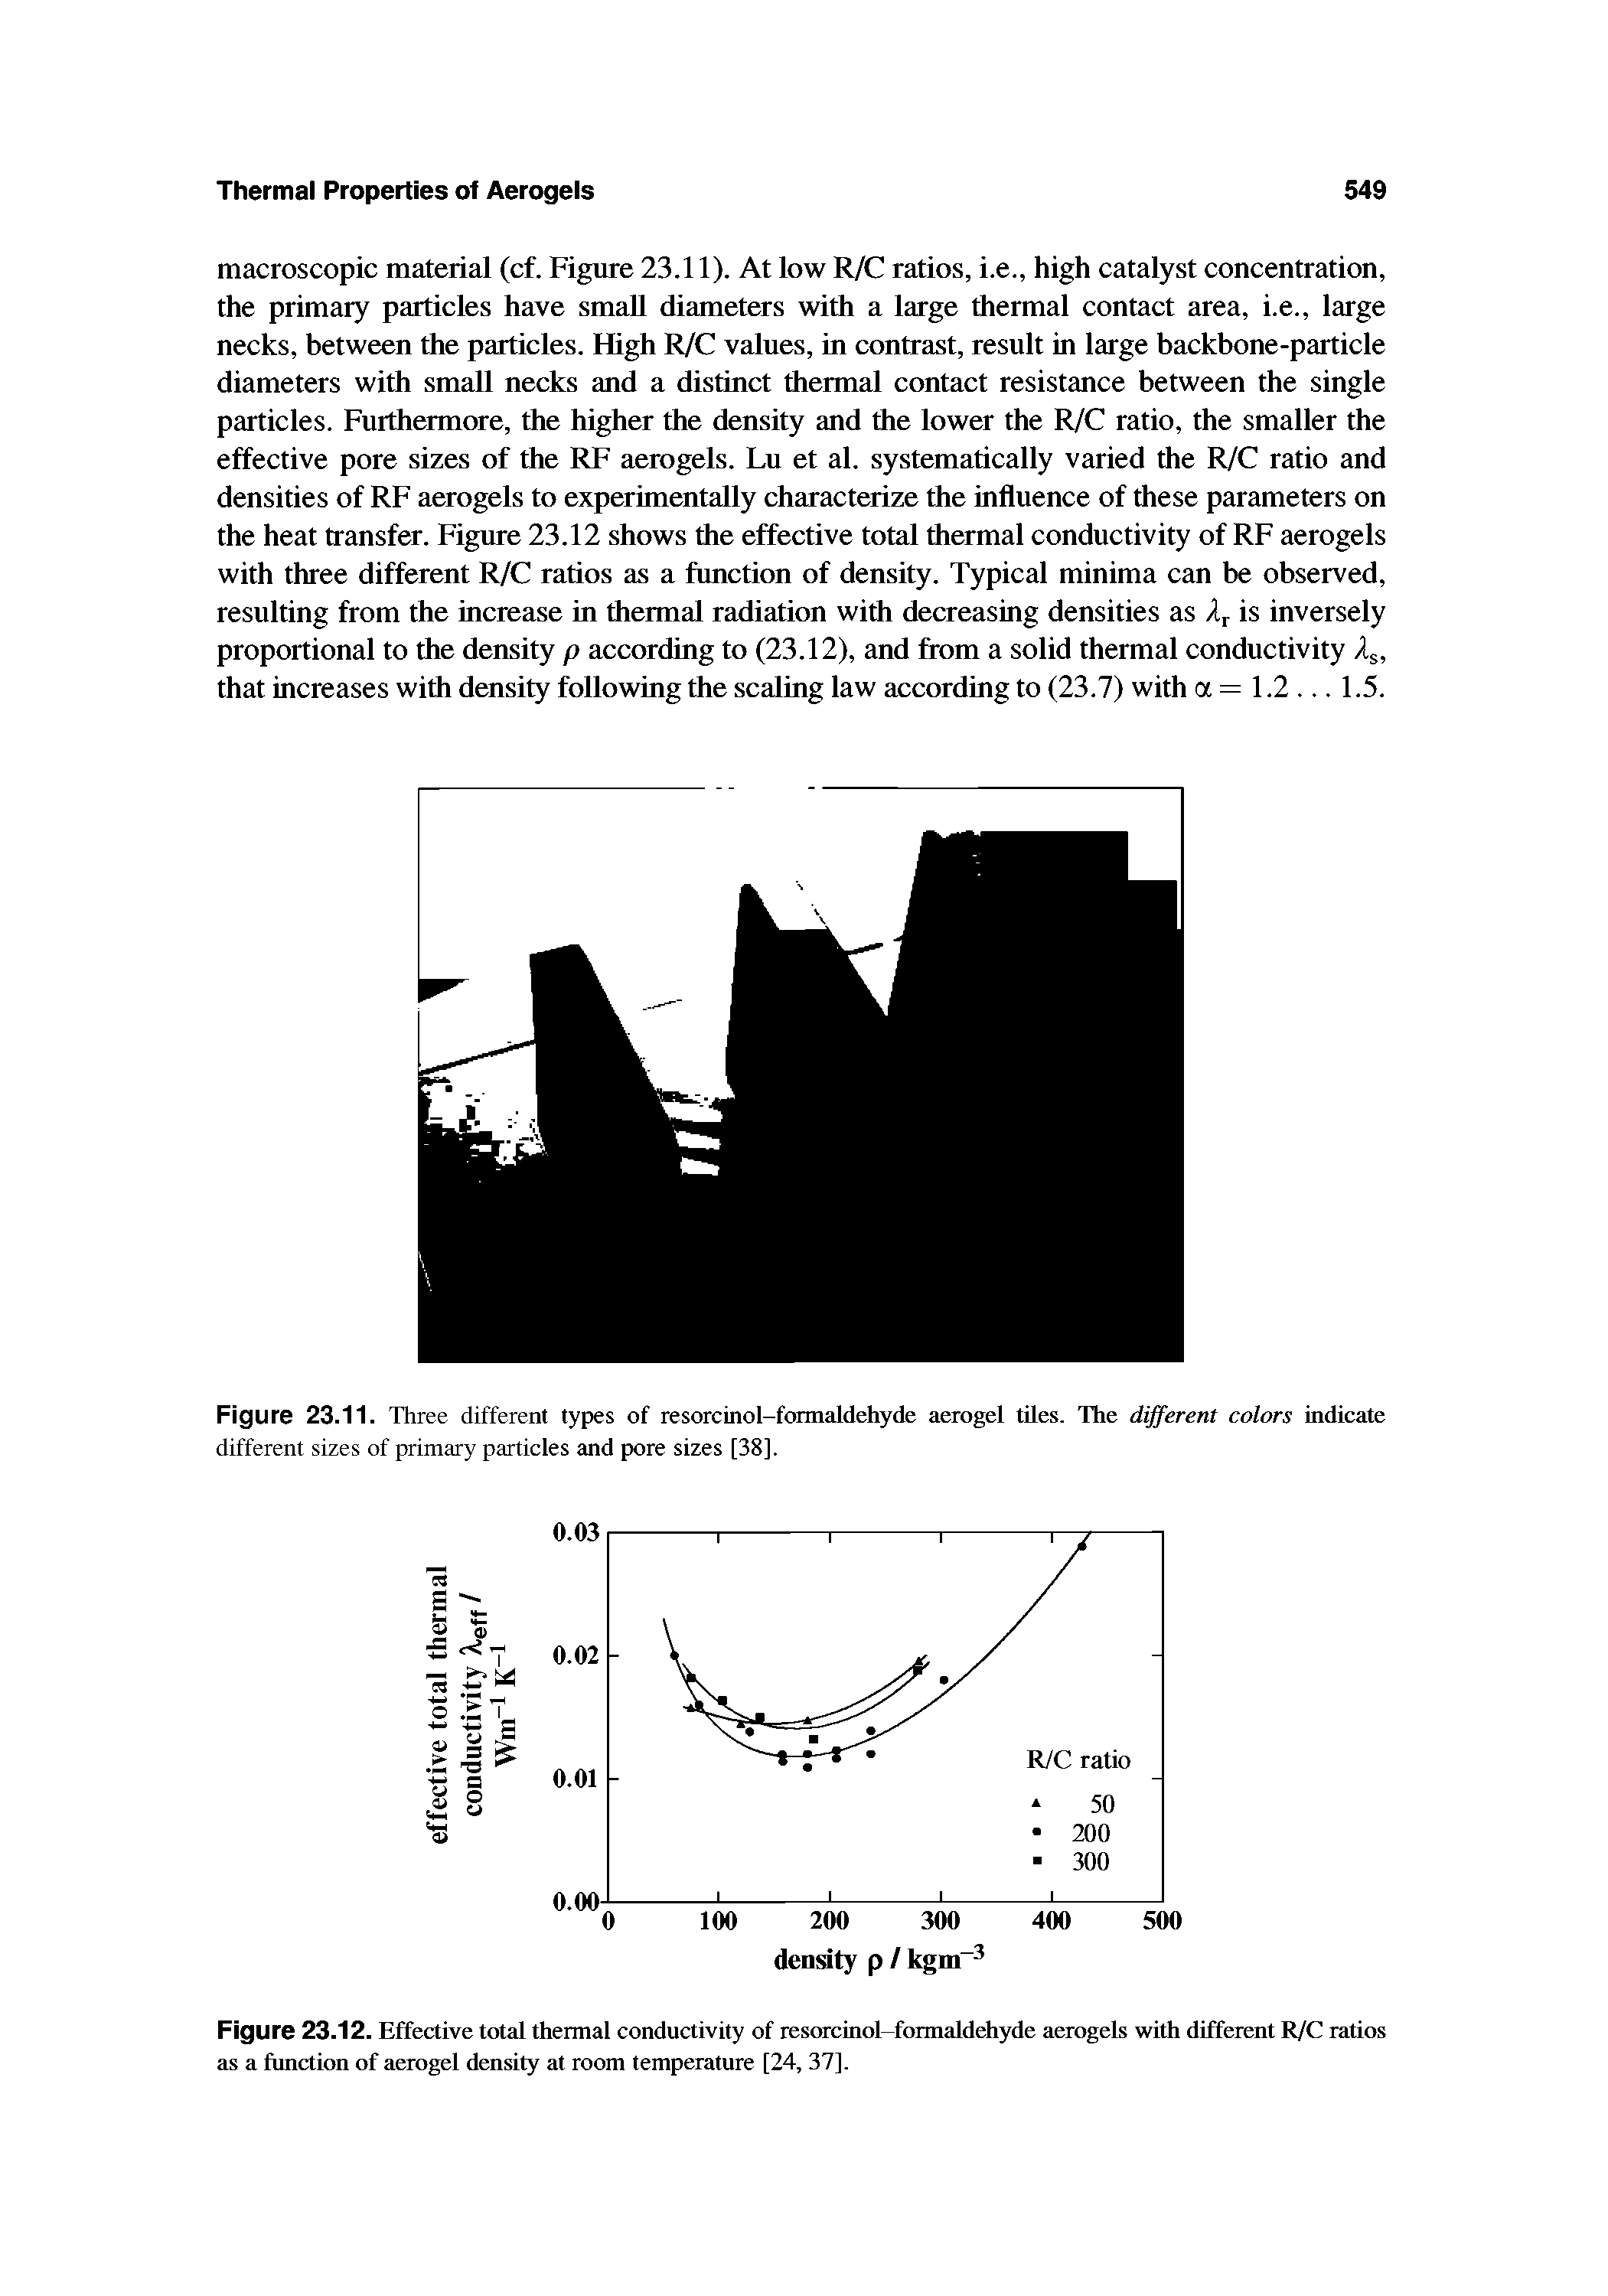 Figure 23.12. Effective total thermal conductivity of resorcinol-formaldehyde aerogels with different R/C ratios as a function of aerogel density at room temperature [24, 37].